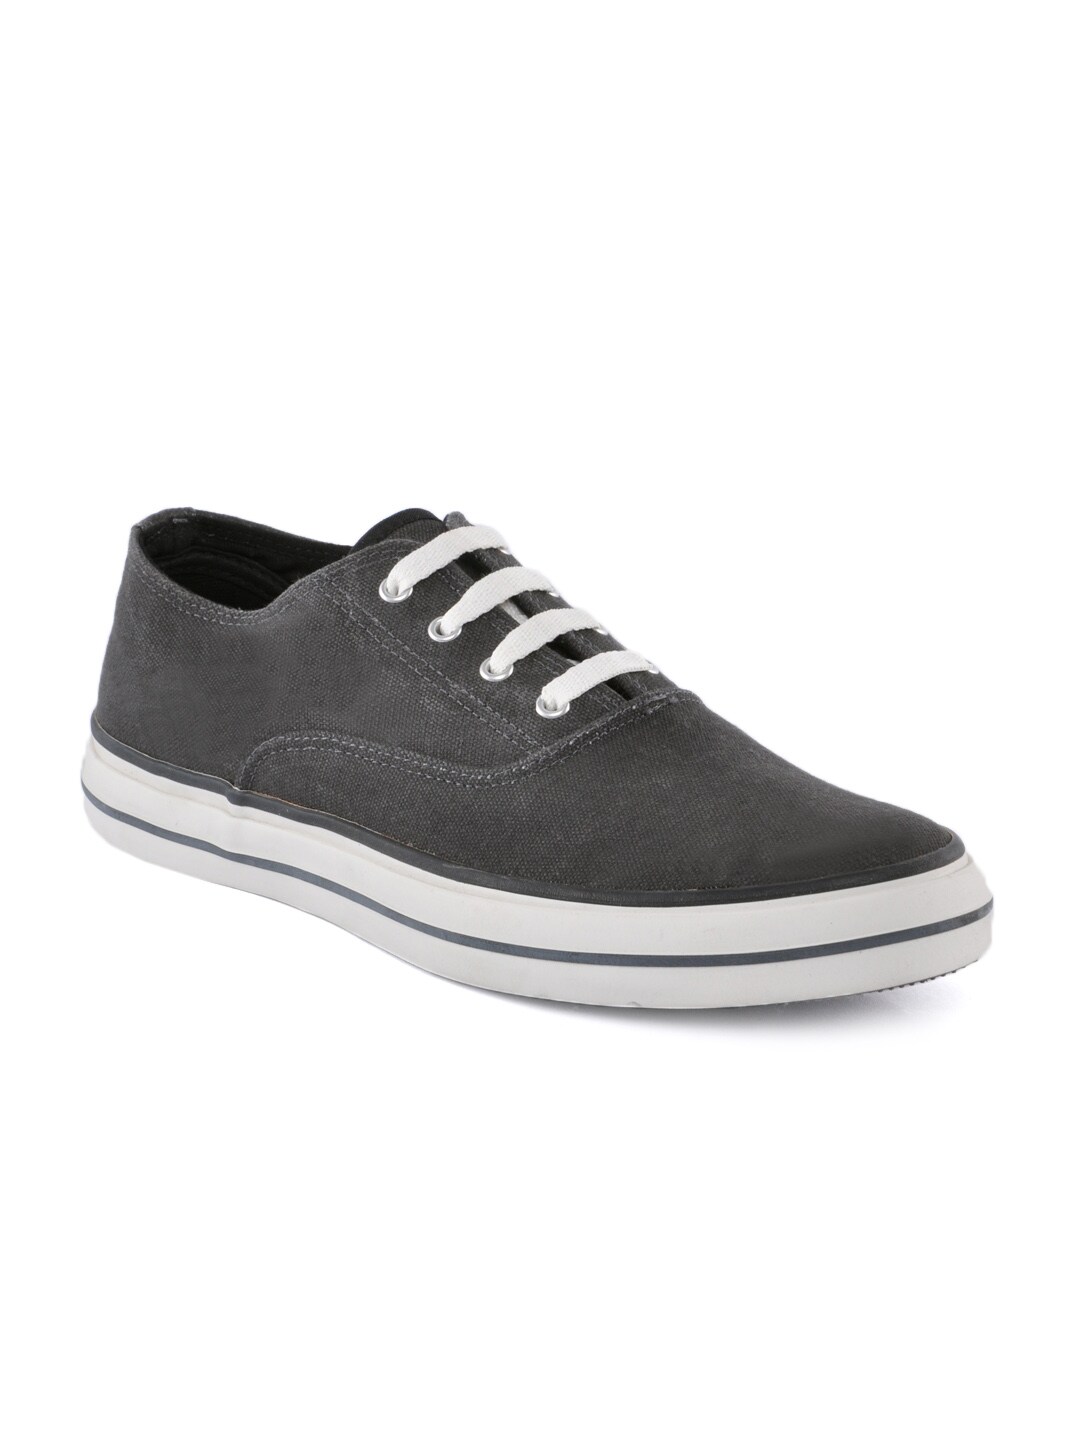 Converse Unisex Grey CT Oxford Ox Casual Shoes